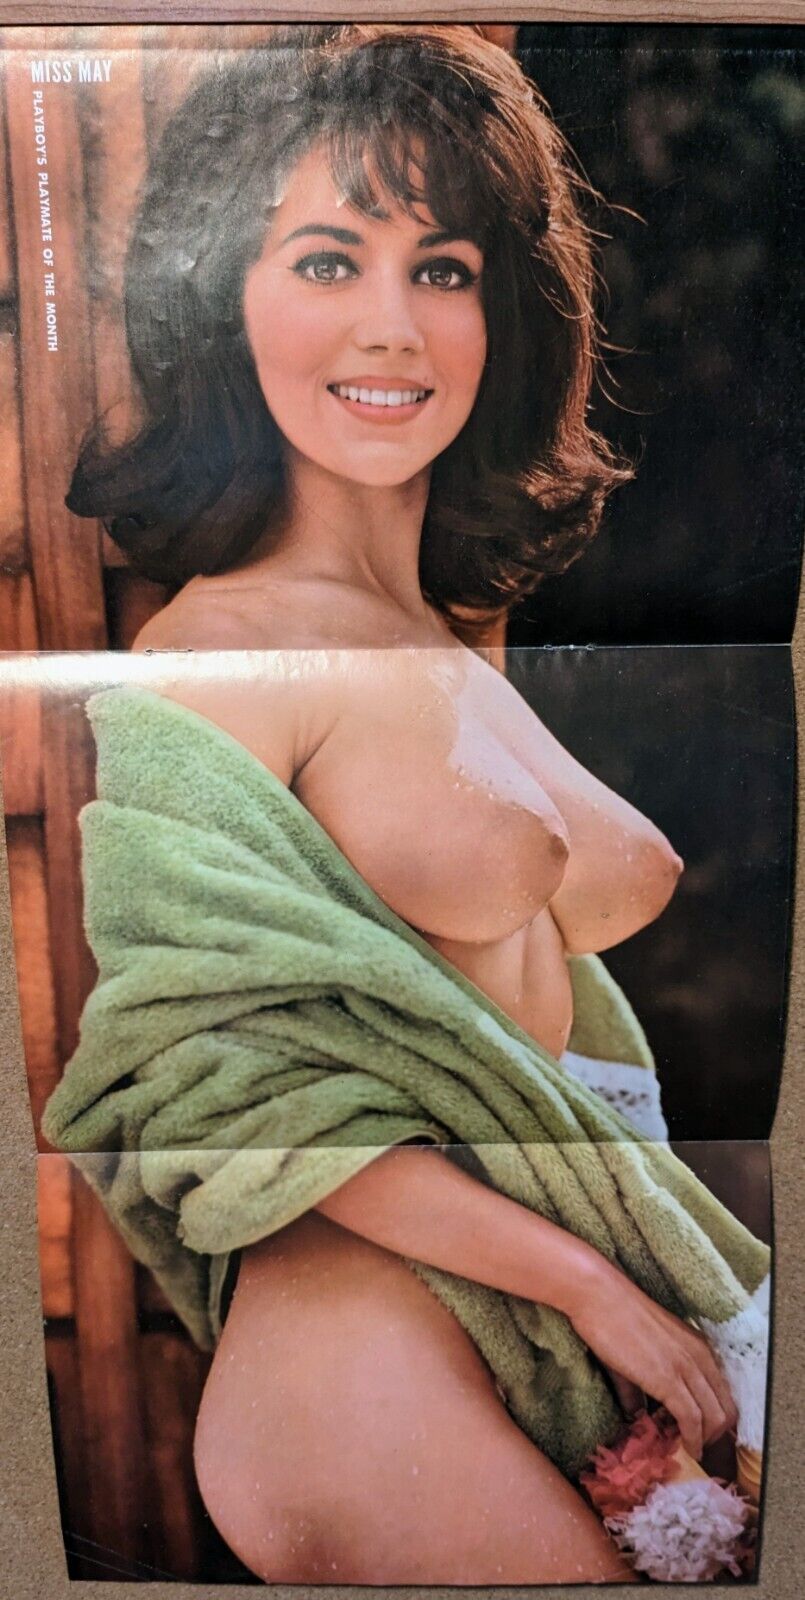 Playboy Magazine May 1965 Replacement Centerfold Only of Maria McBane